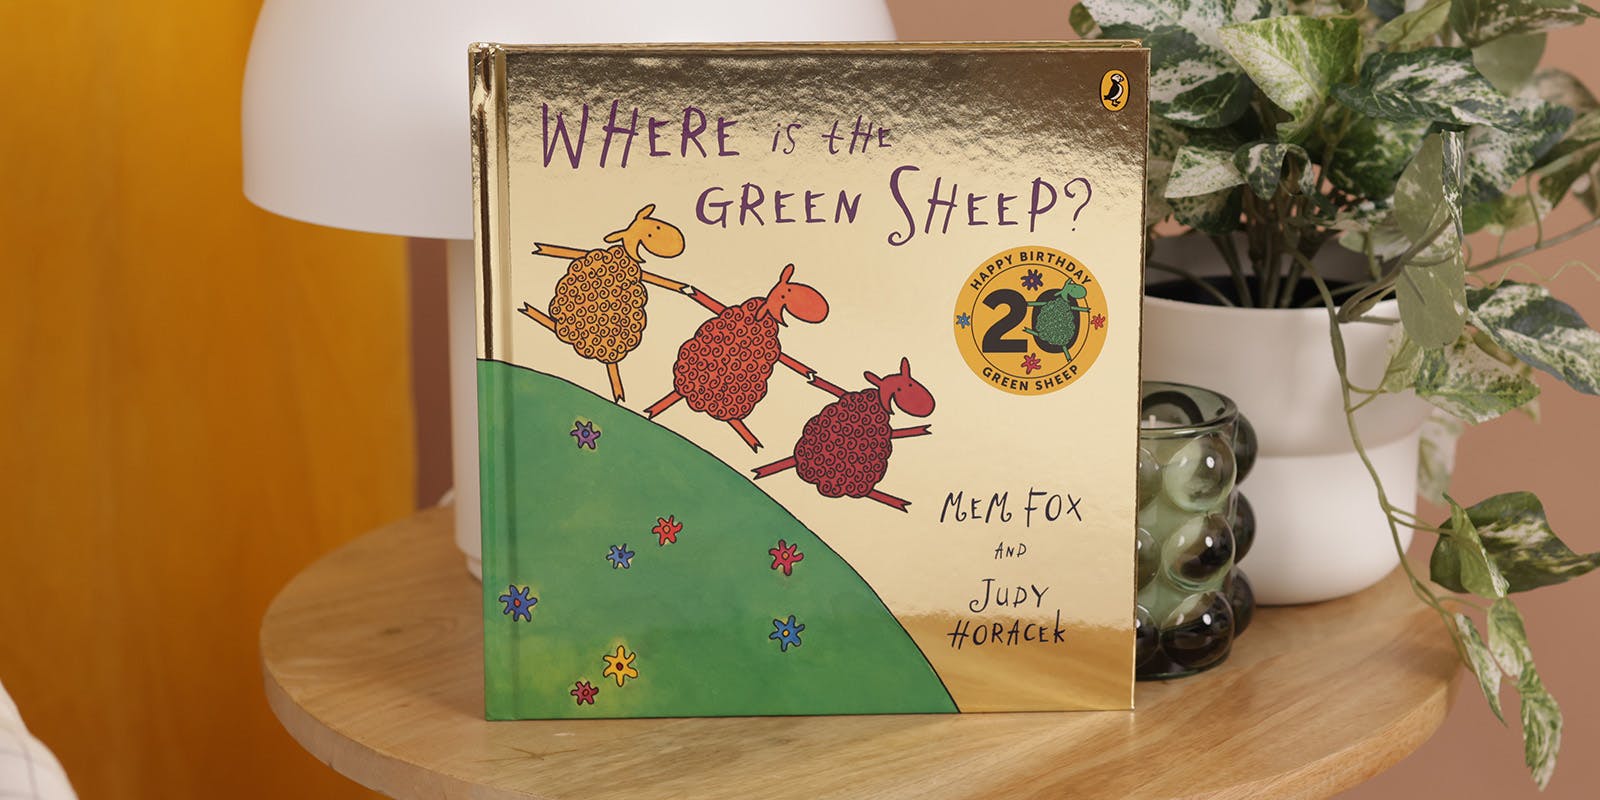 Penguin Random House Australia celebrates 20th anniversary of Where is the Green Sheep? with special gold-foiled collector’s edition 